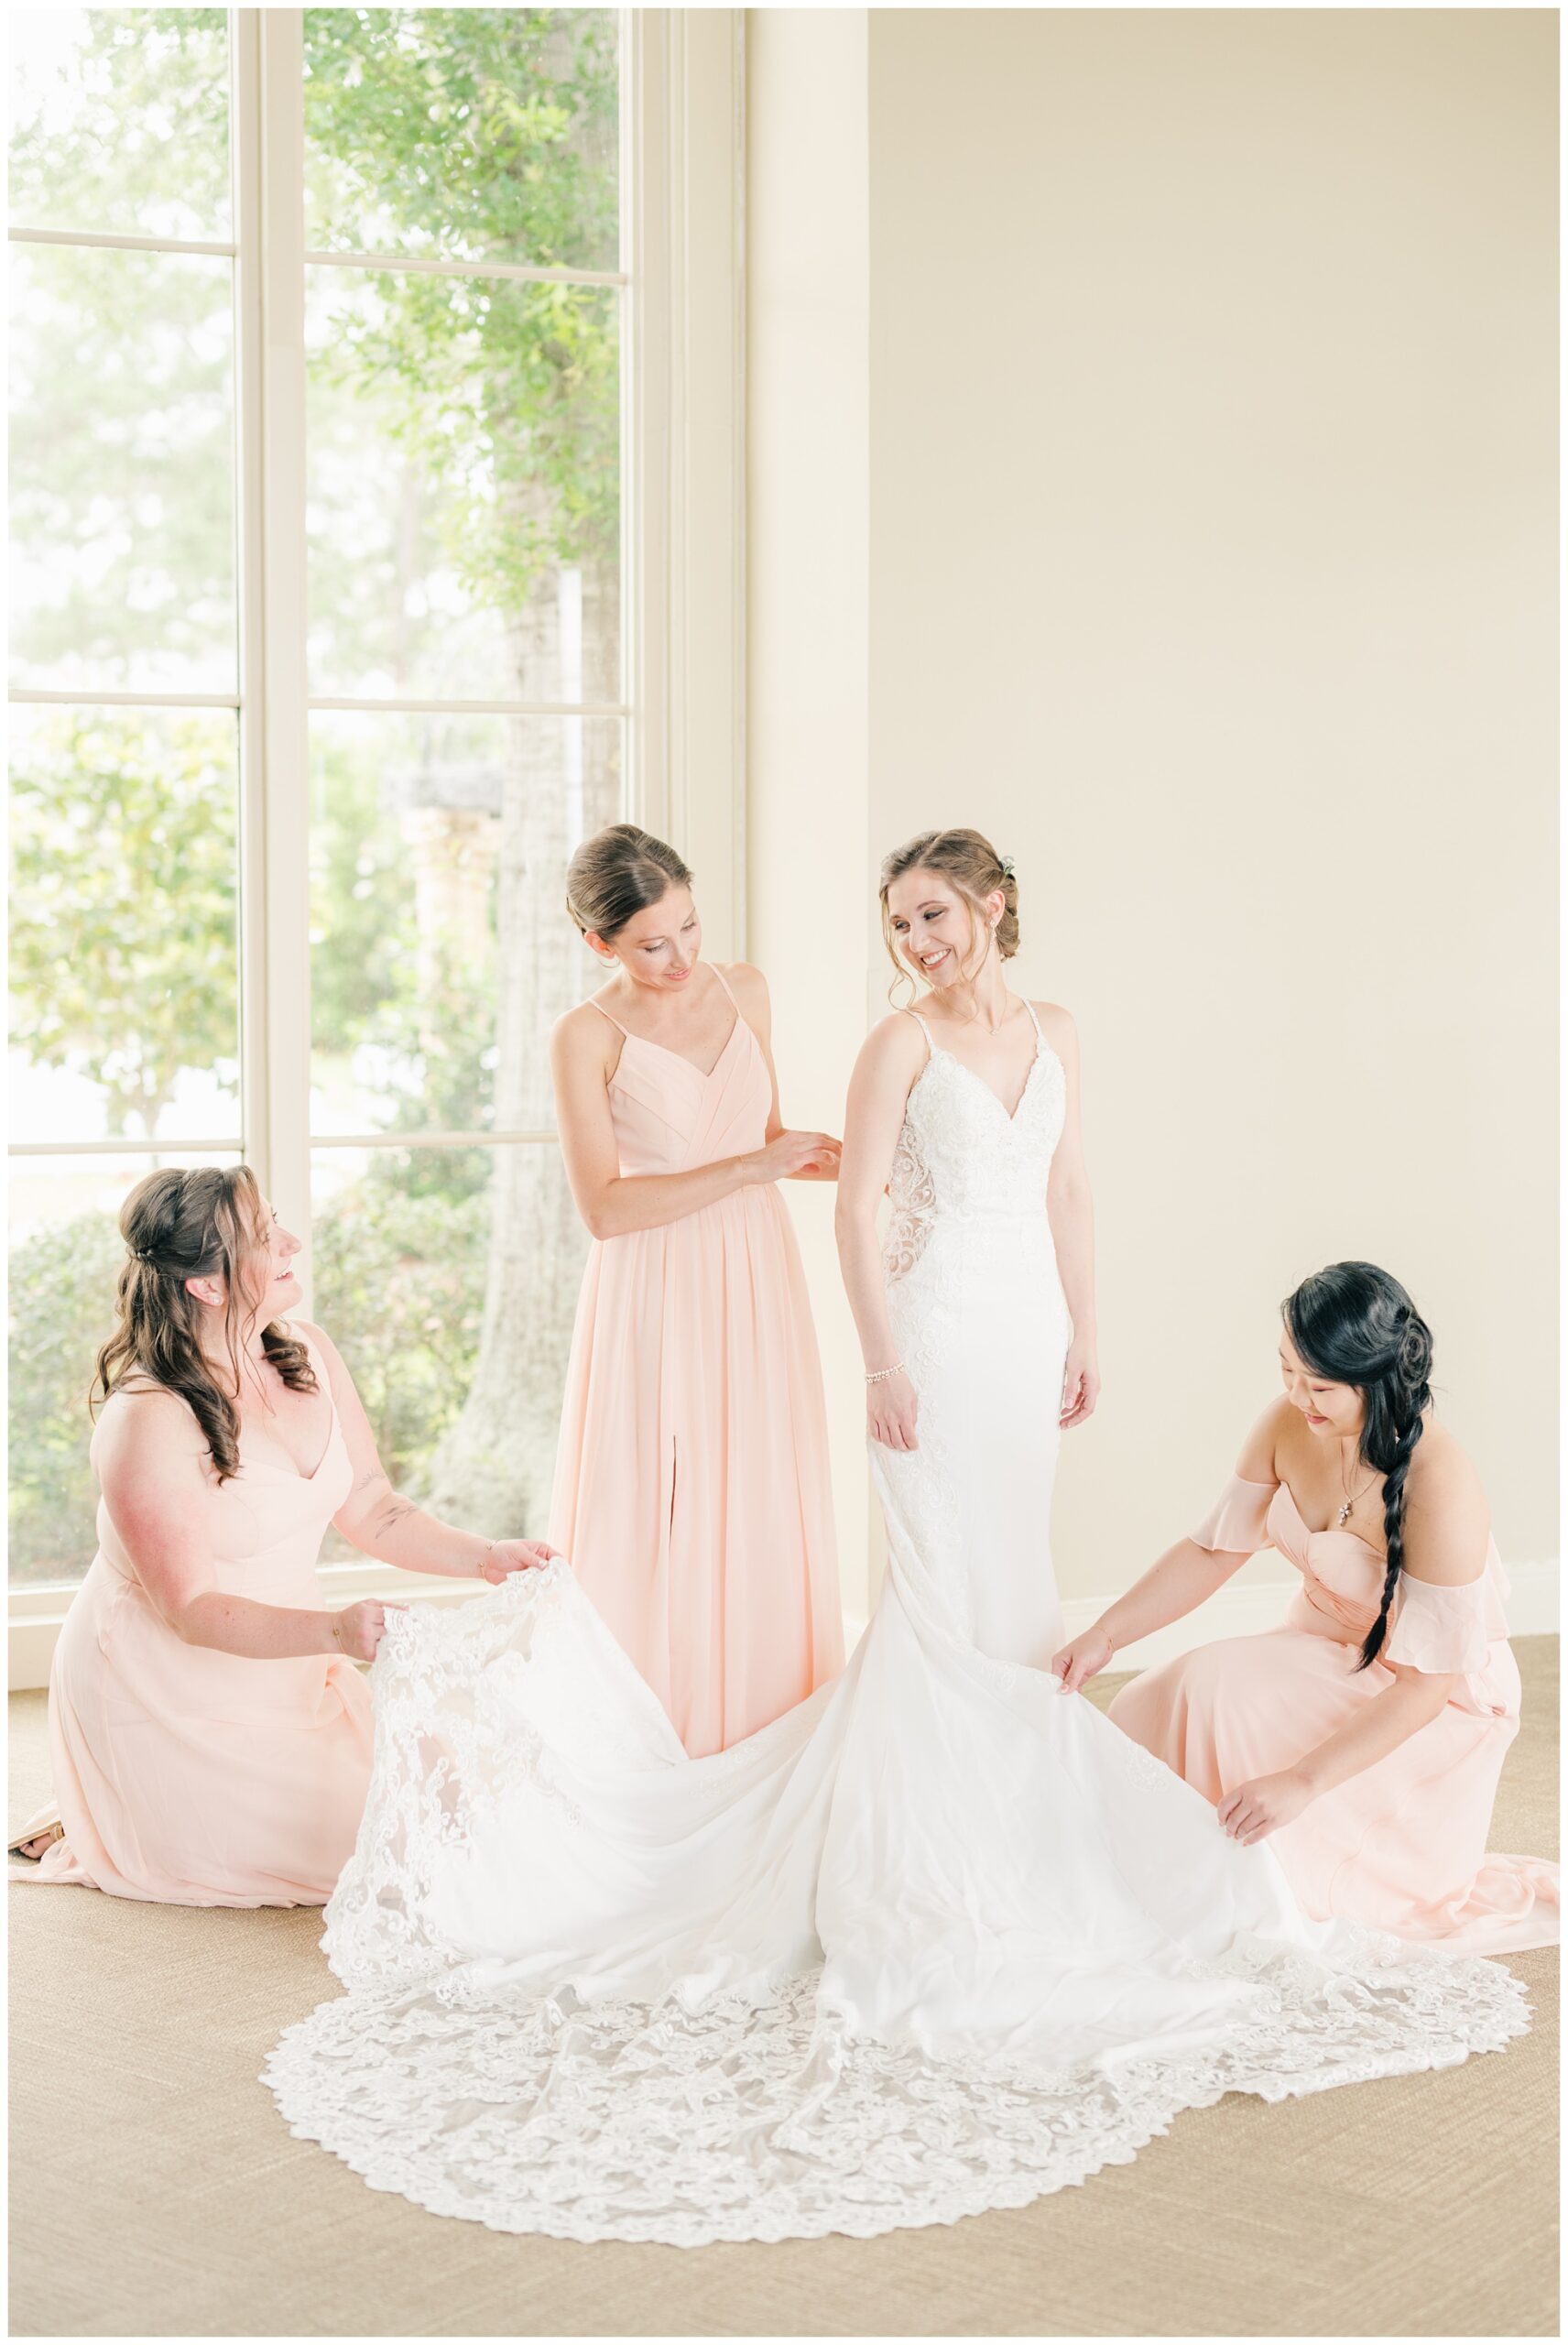 Getting Ready Portrait with Bride and Bridesmaids at Bentwater Yacht club on lake Conroe.